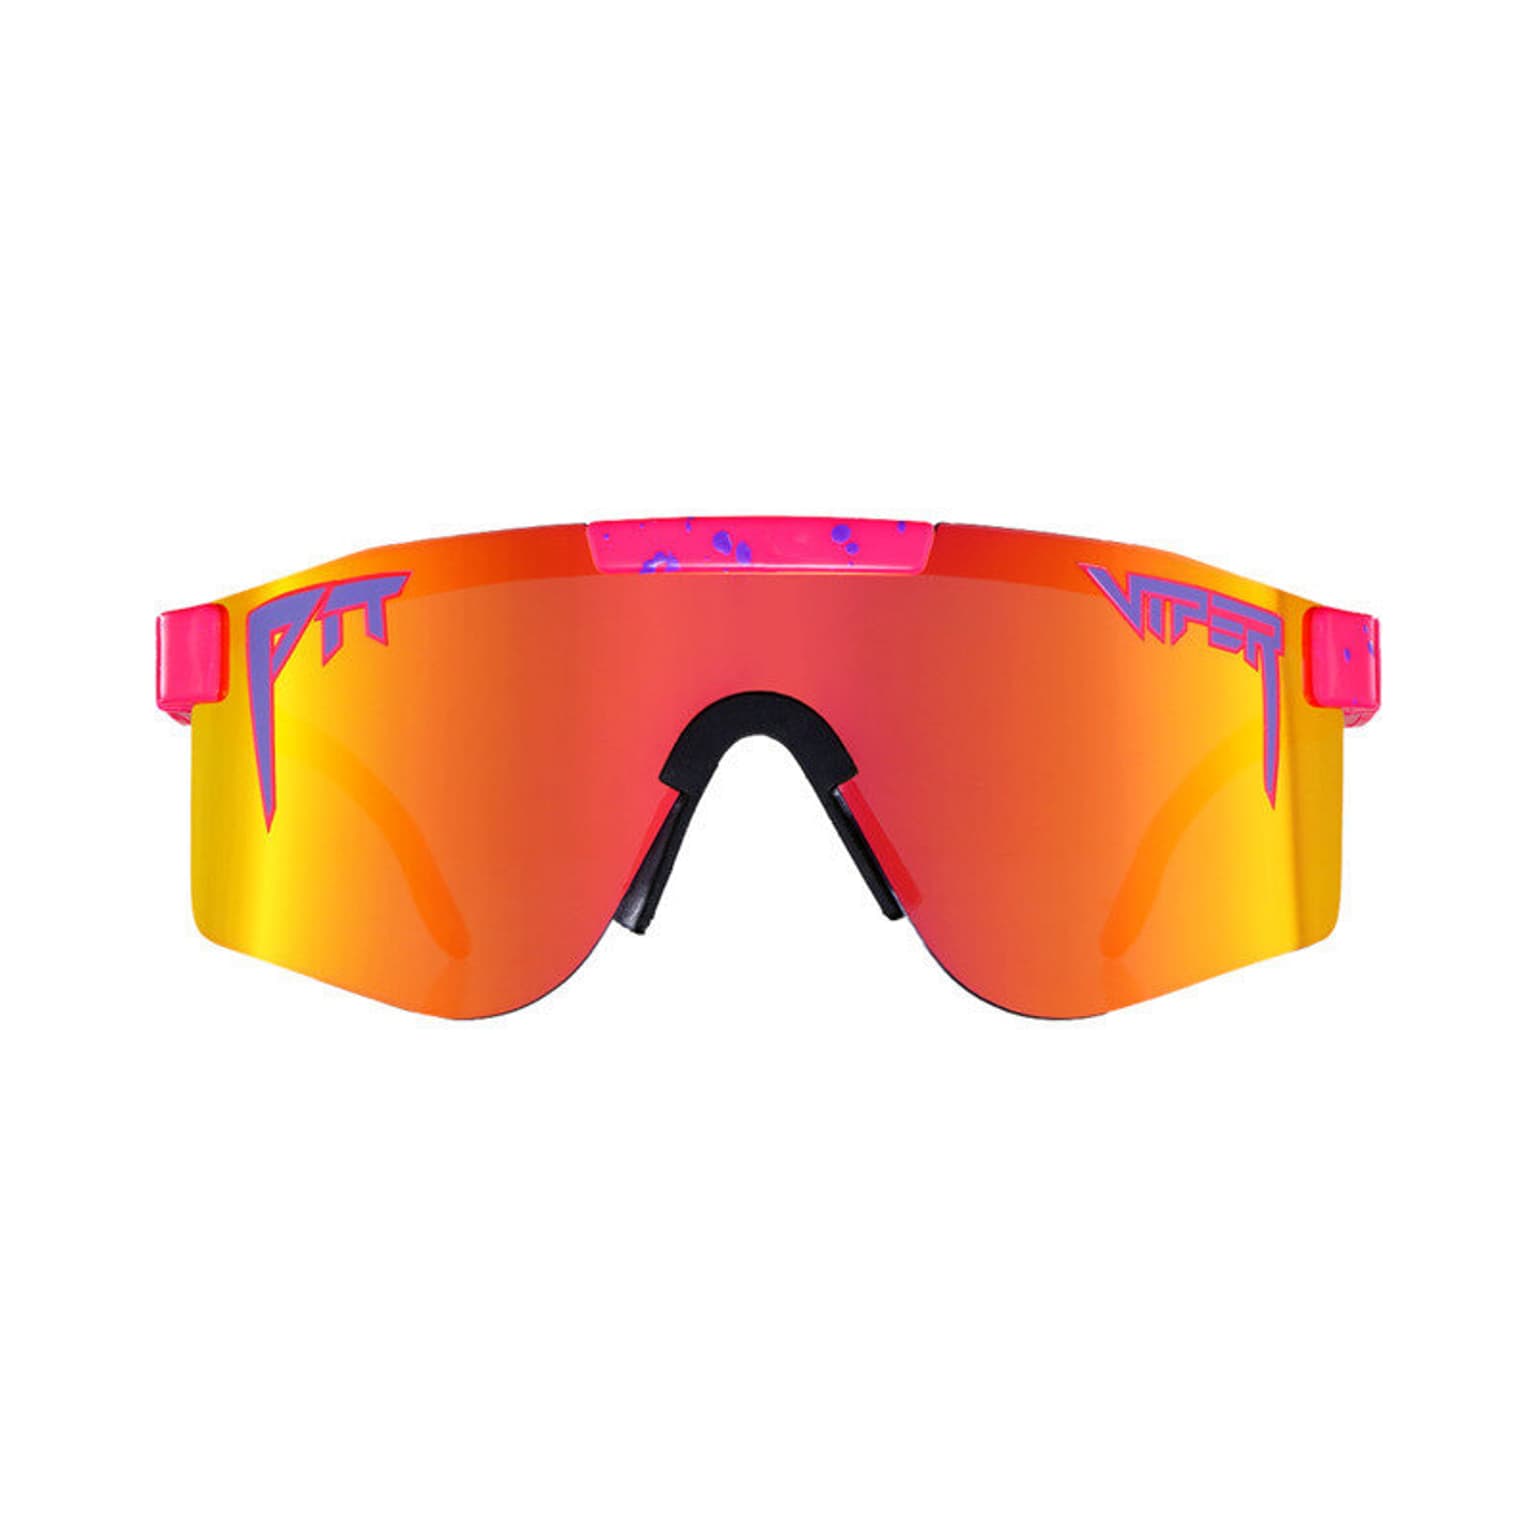 Pit Viper Pit Viper The Radical Polarized Double Wide Sportbrille 2